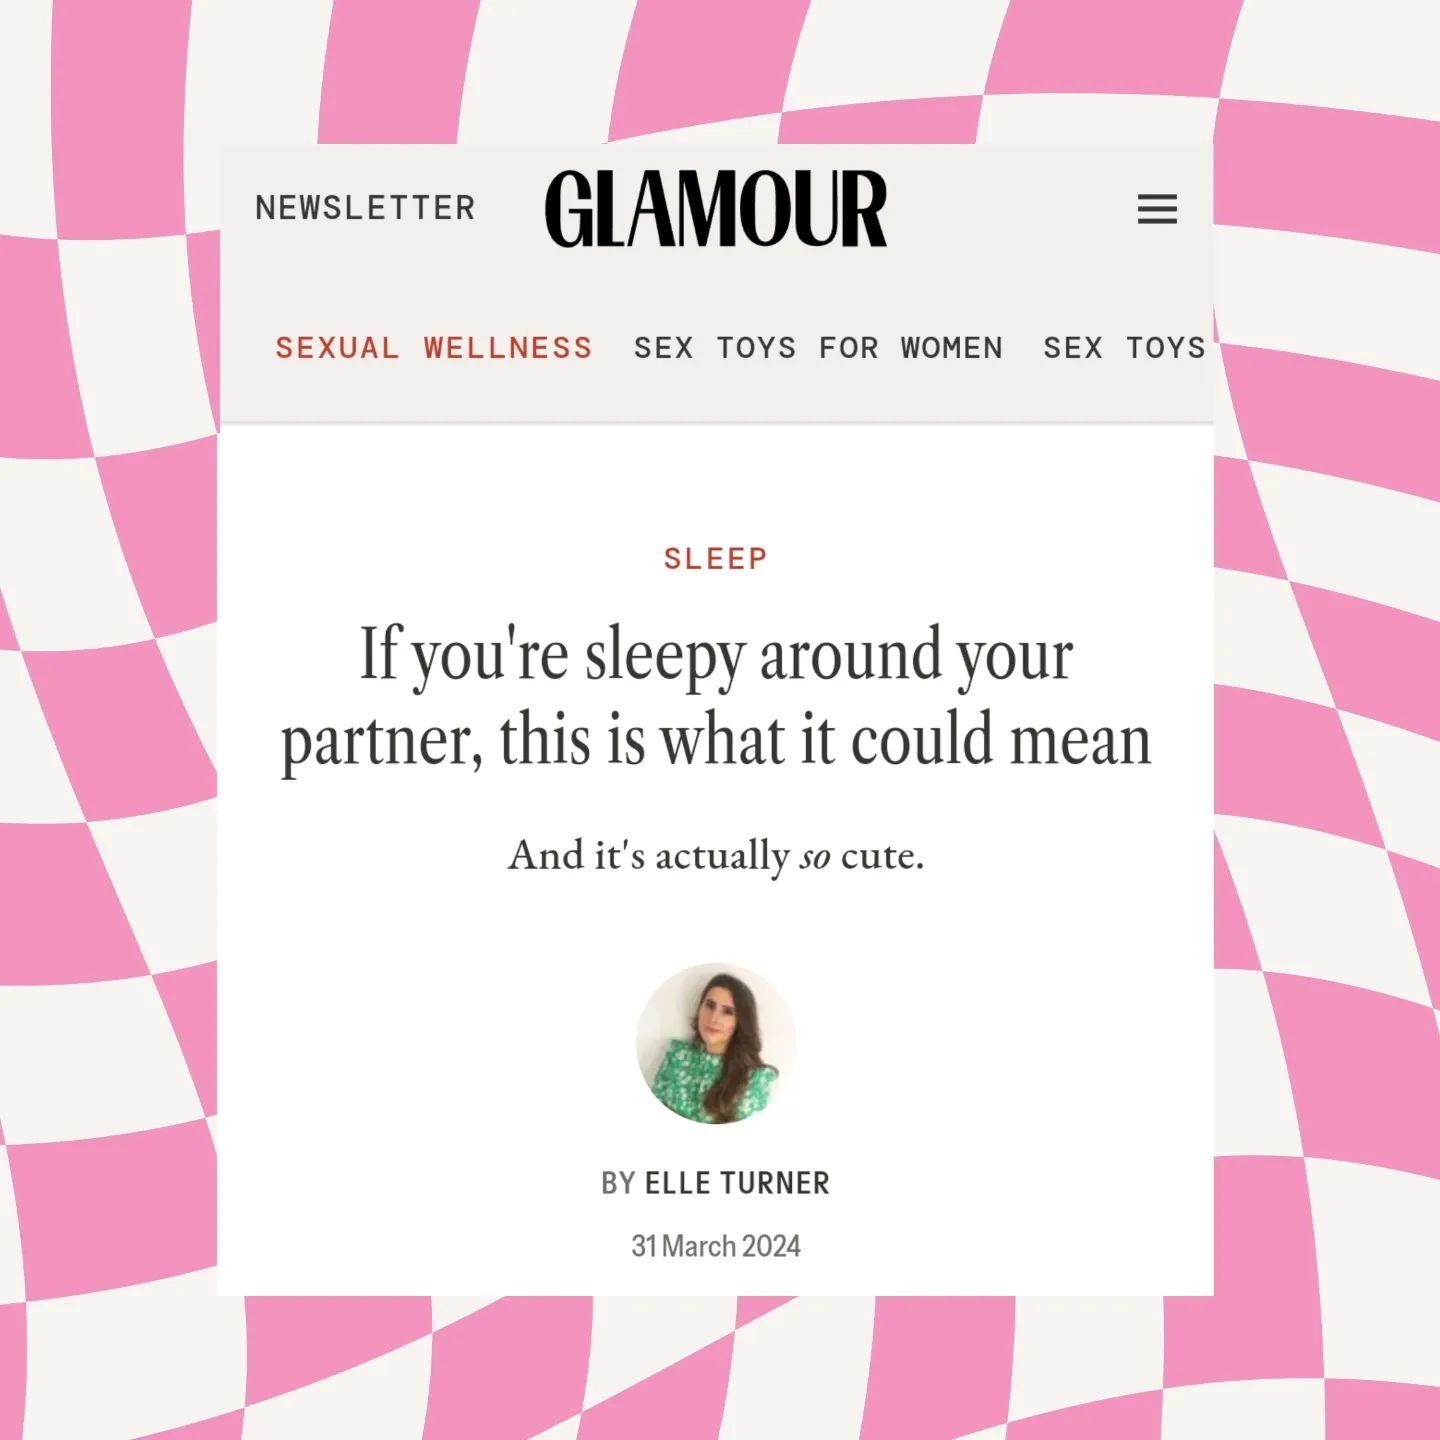 Does your relationship make you sleepy? @glamouruk

This is me, every night. Falling asleep on my husband whilst watching KDramas.

So I had a fun chat with Glamour about what happens to our nervous system when we're with someone we love and trust. 
